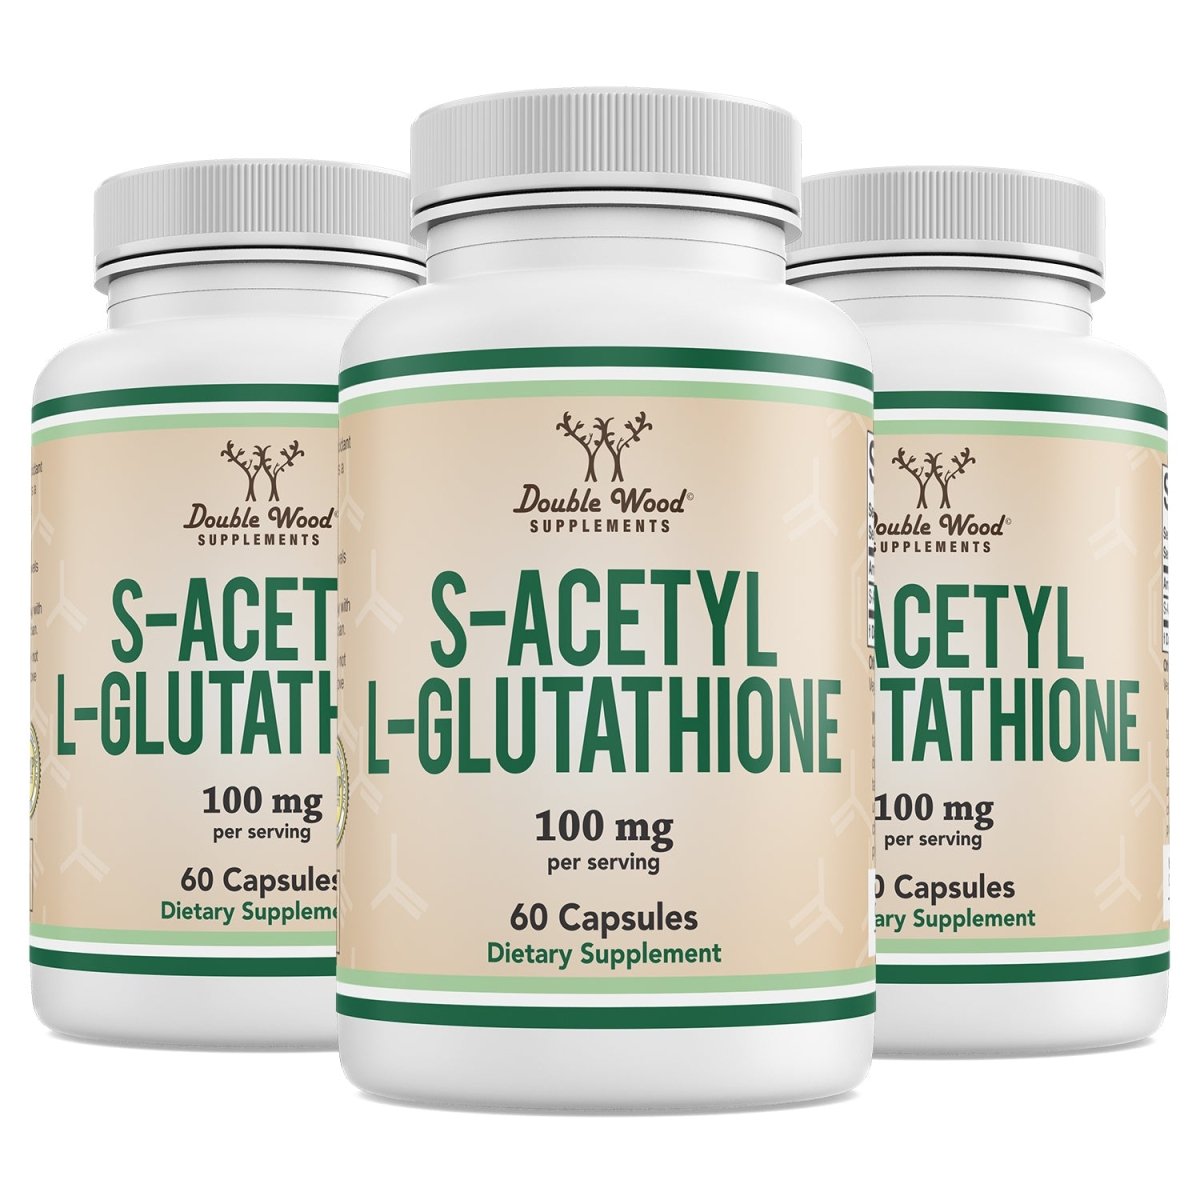 S-Acetyl L-Glutathione - Double Wood Supplements